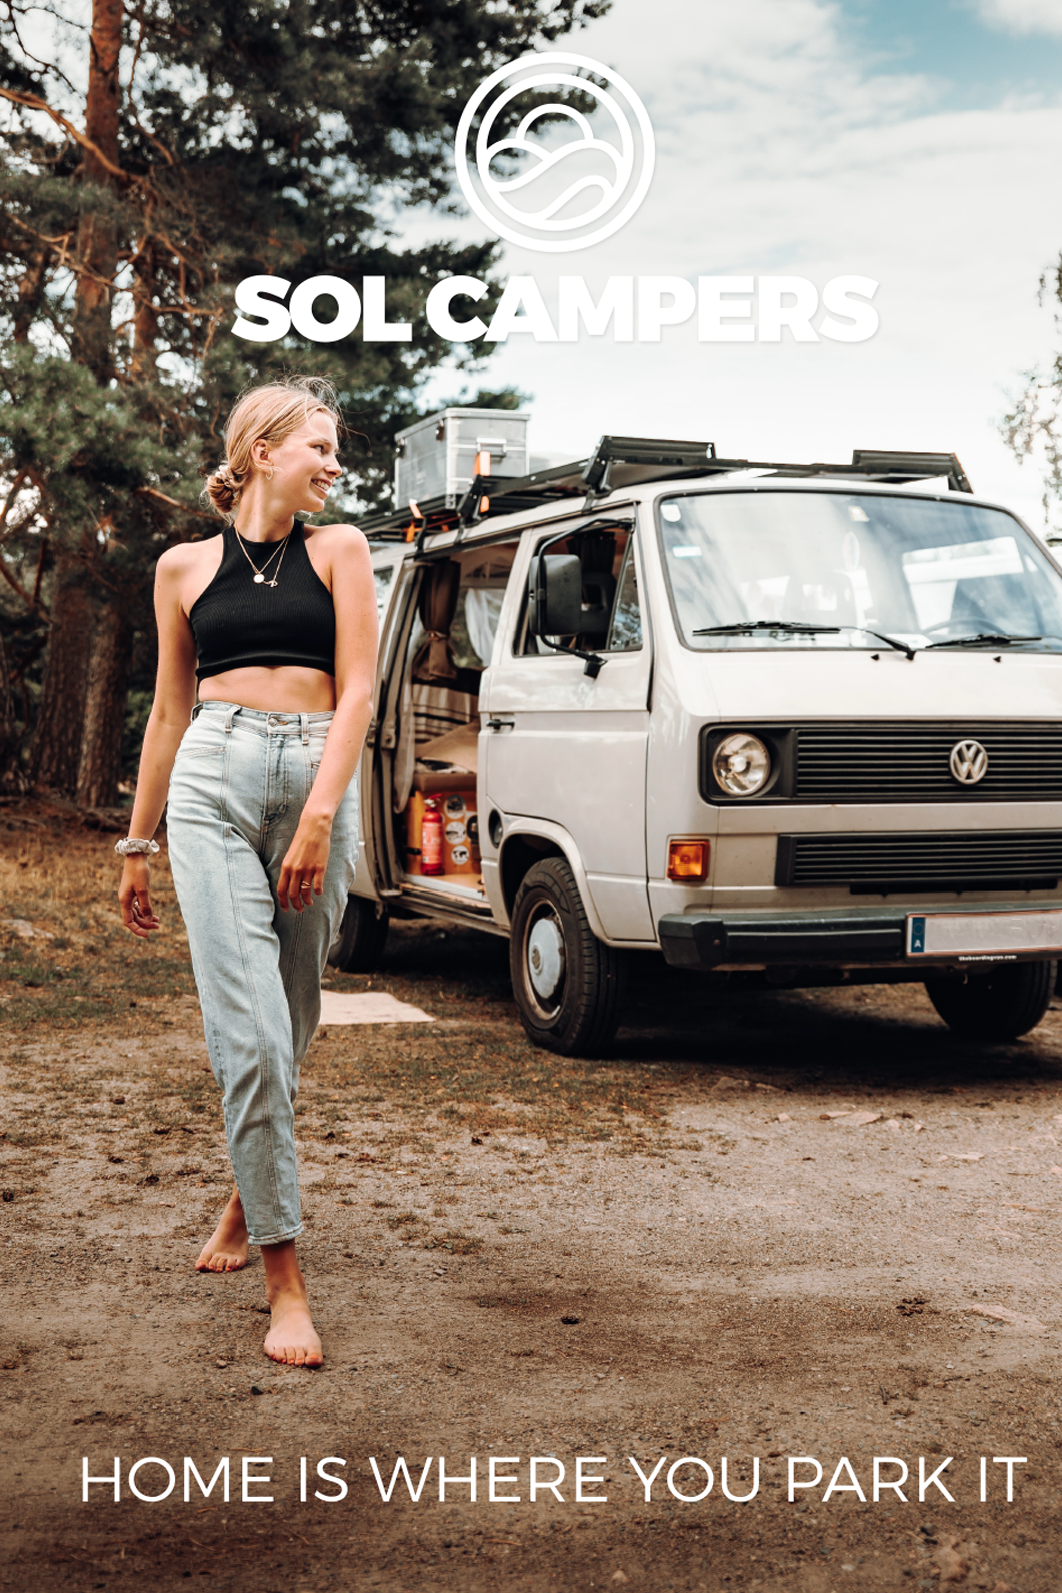 Sol campers campagne 3